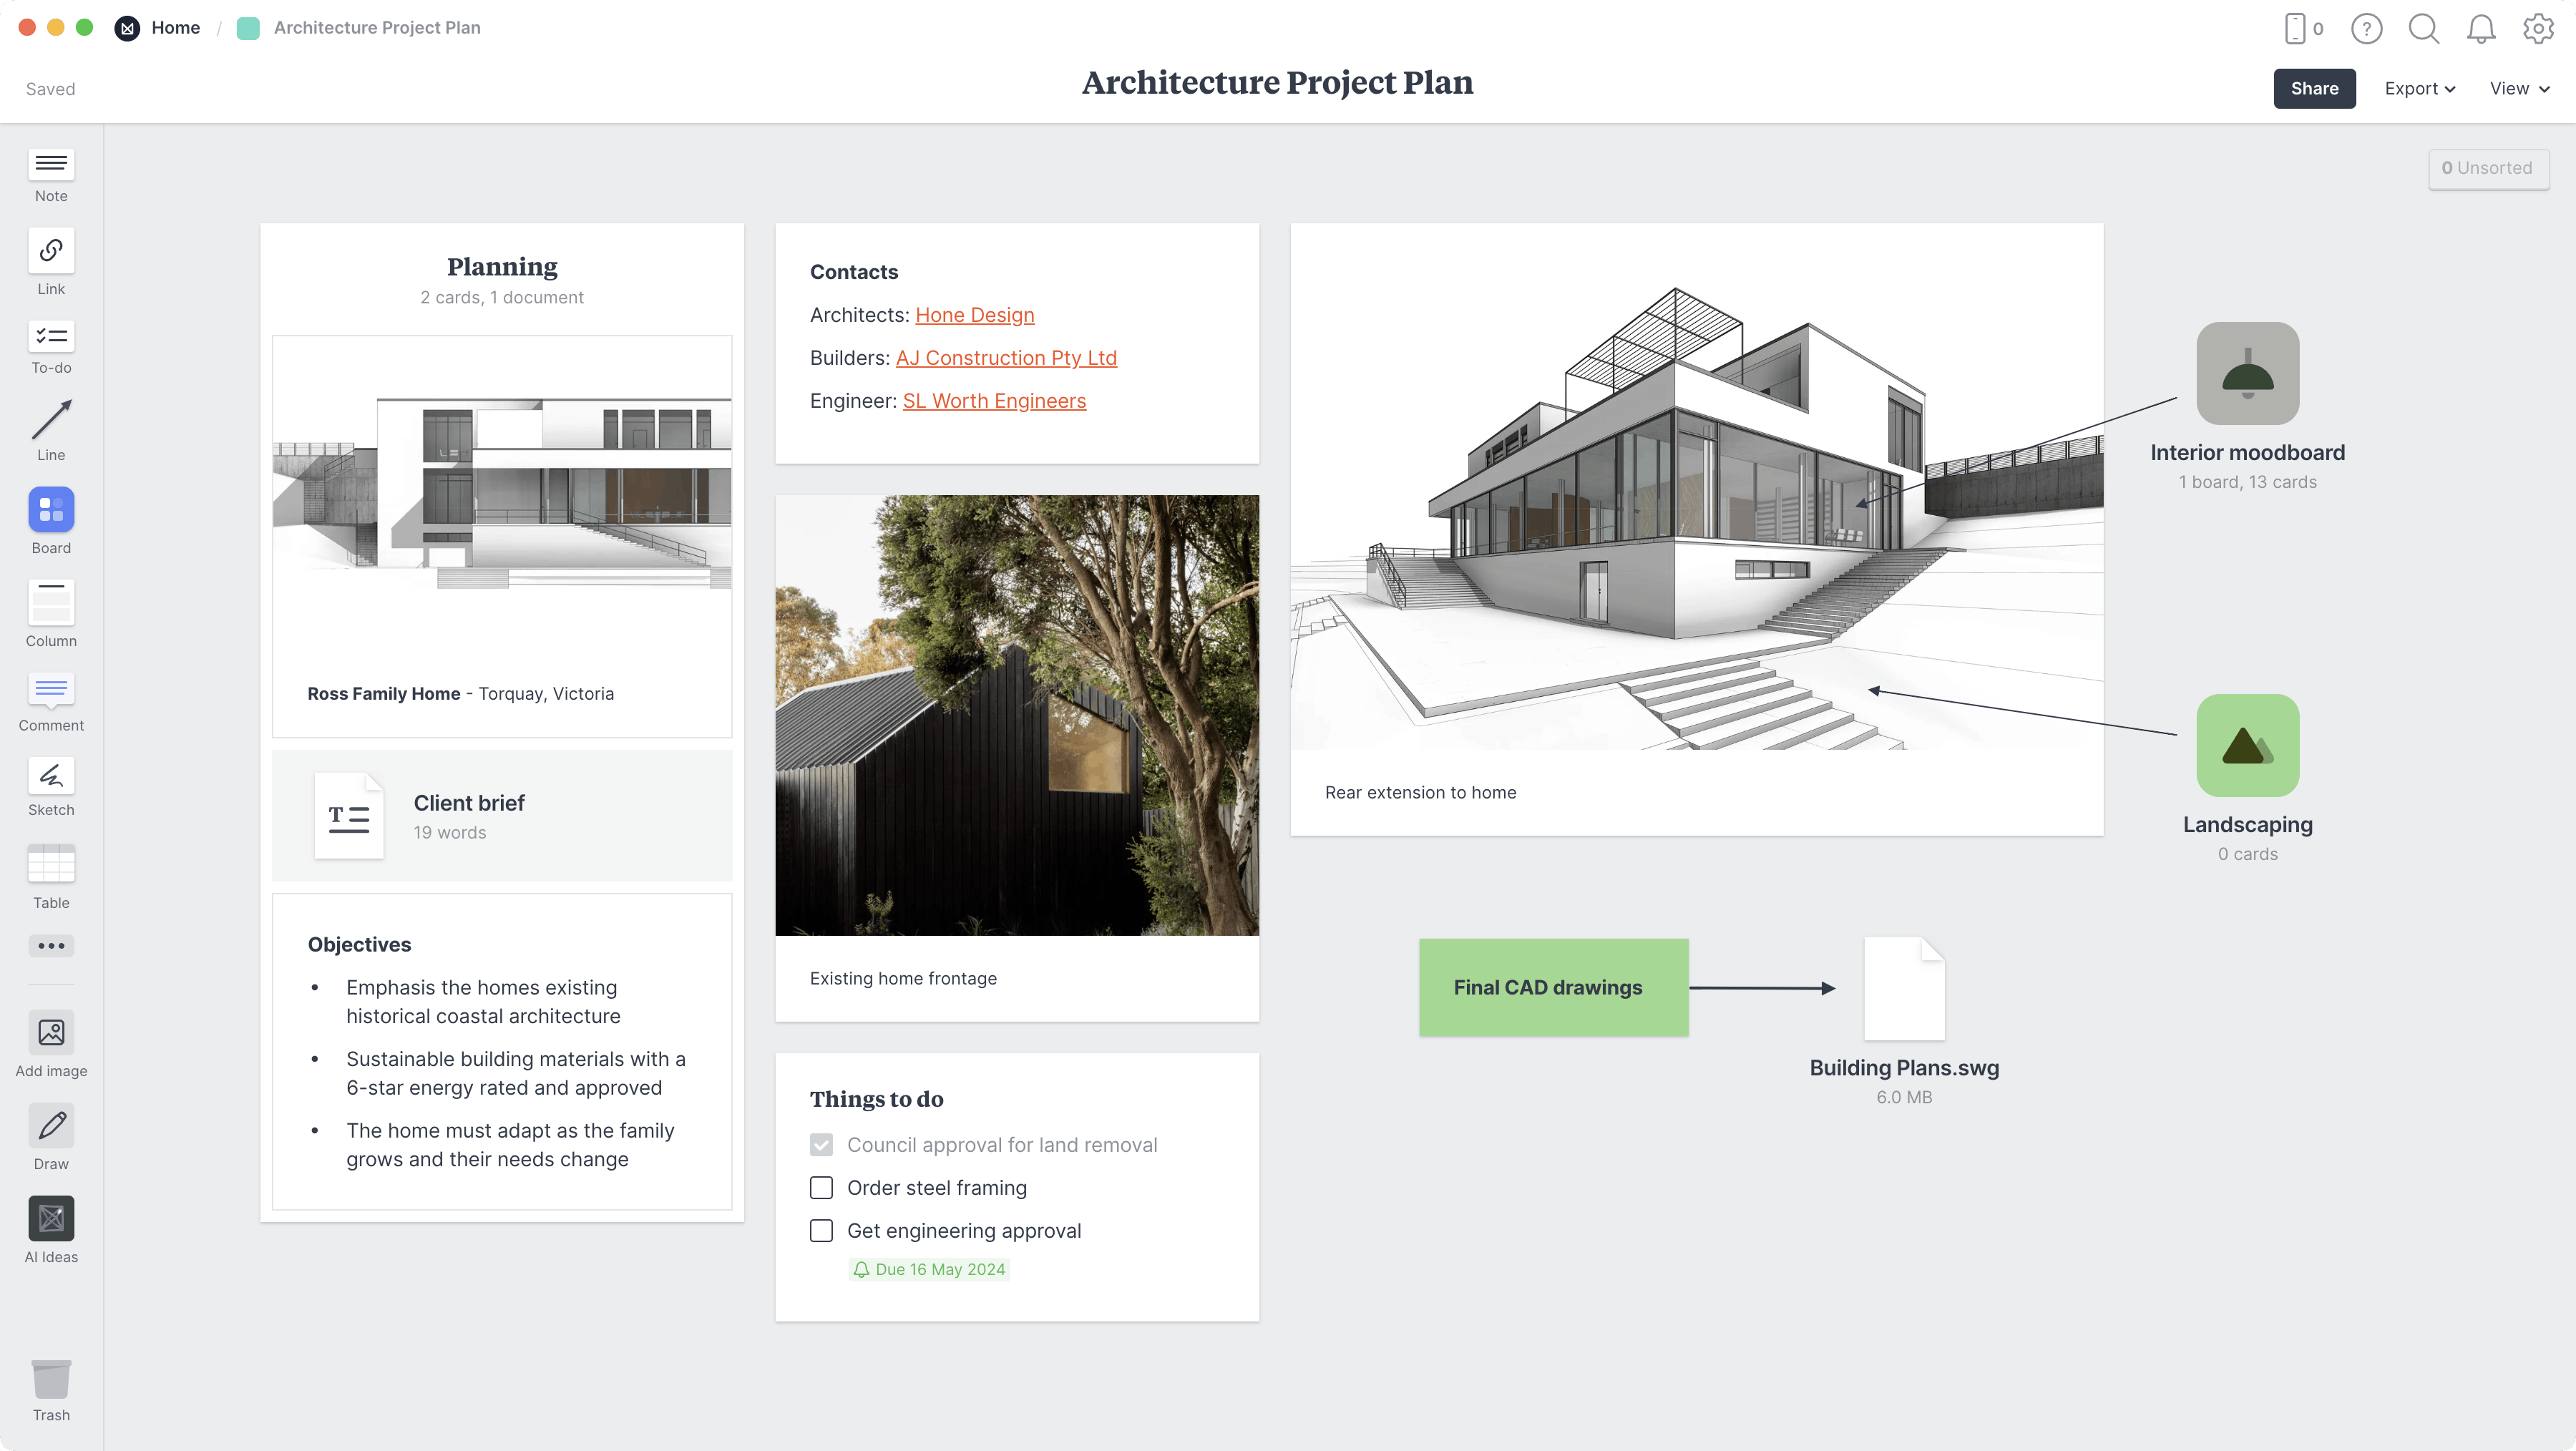 Architecture Project Plan Template, within the Milanote app